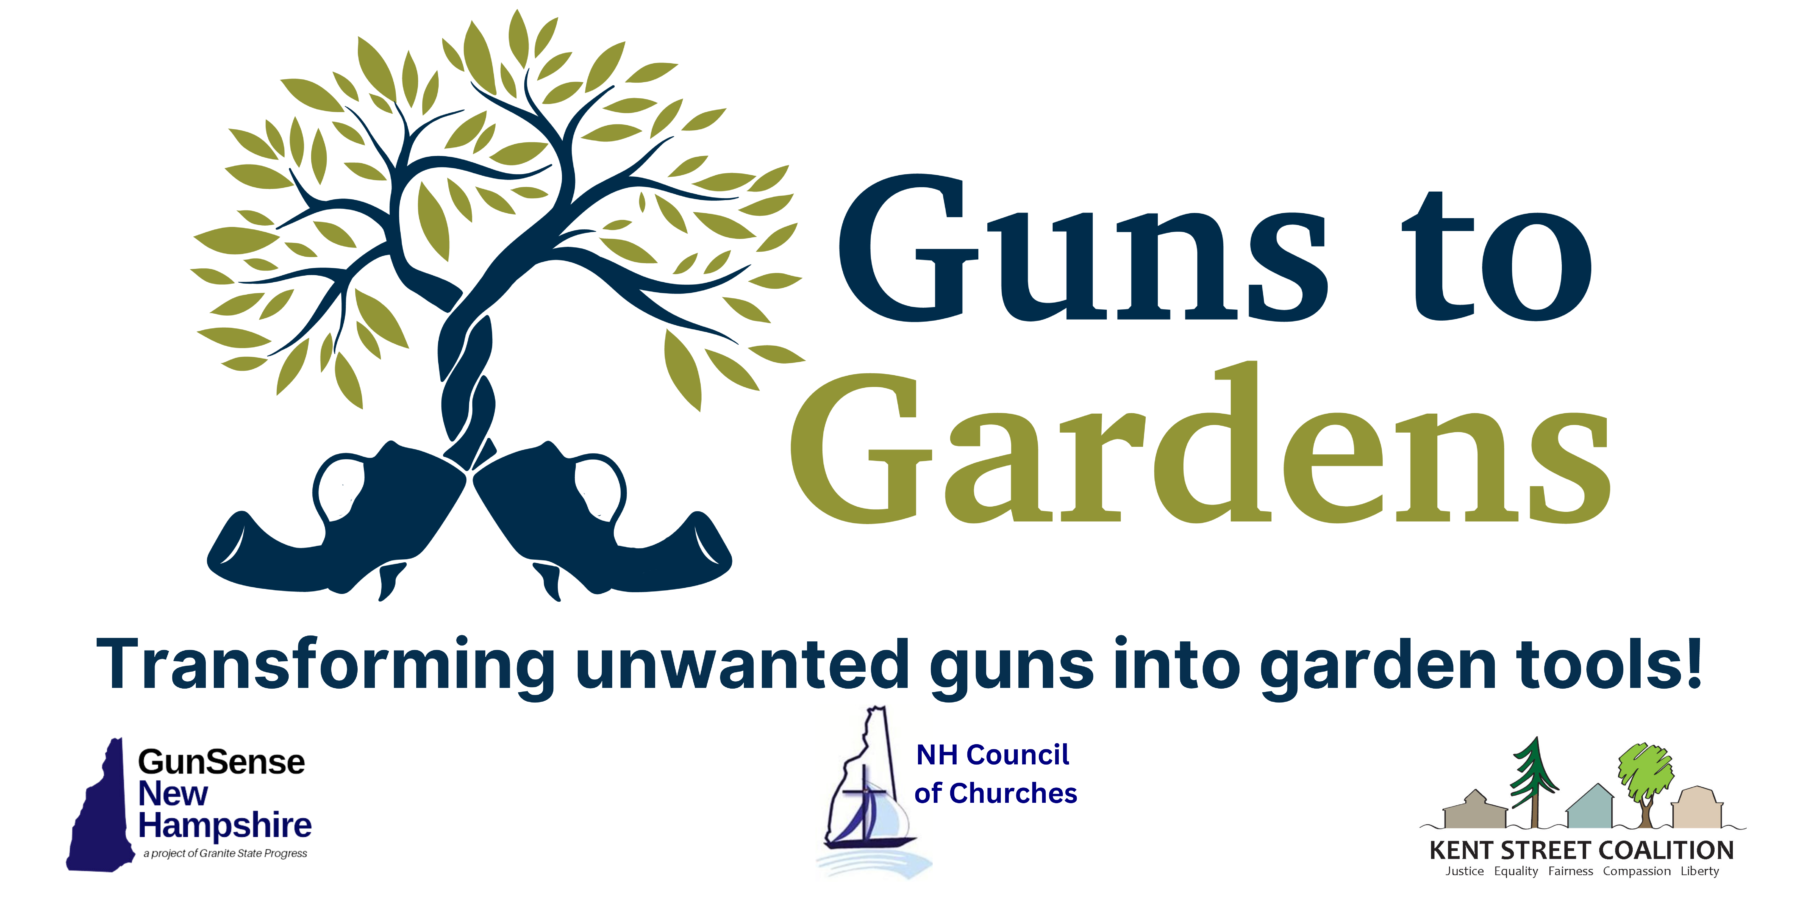 Image of two guns with trees growing out of them; Text: Guns to Gardens; Subtext: Transforming unwanted guns into garden tools; Logos for GunSense NH, a project of Granite State Progress, NH Council of Churches, and the Kent Street Coalition